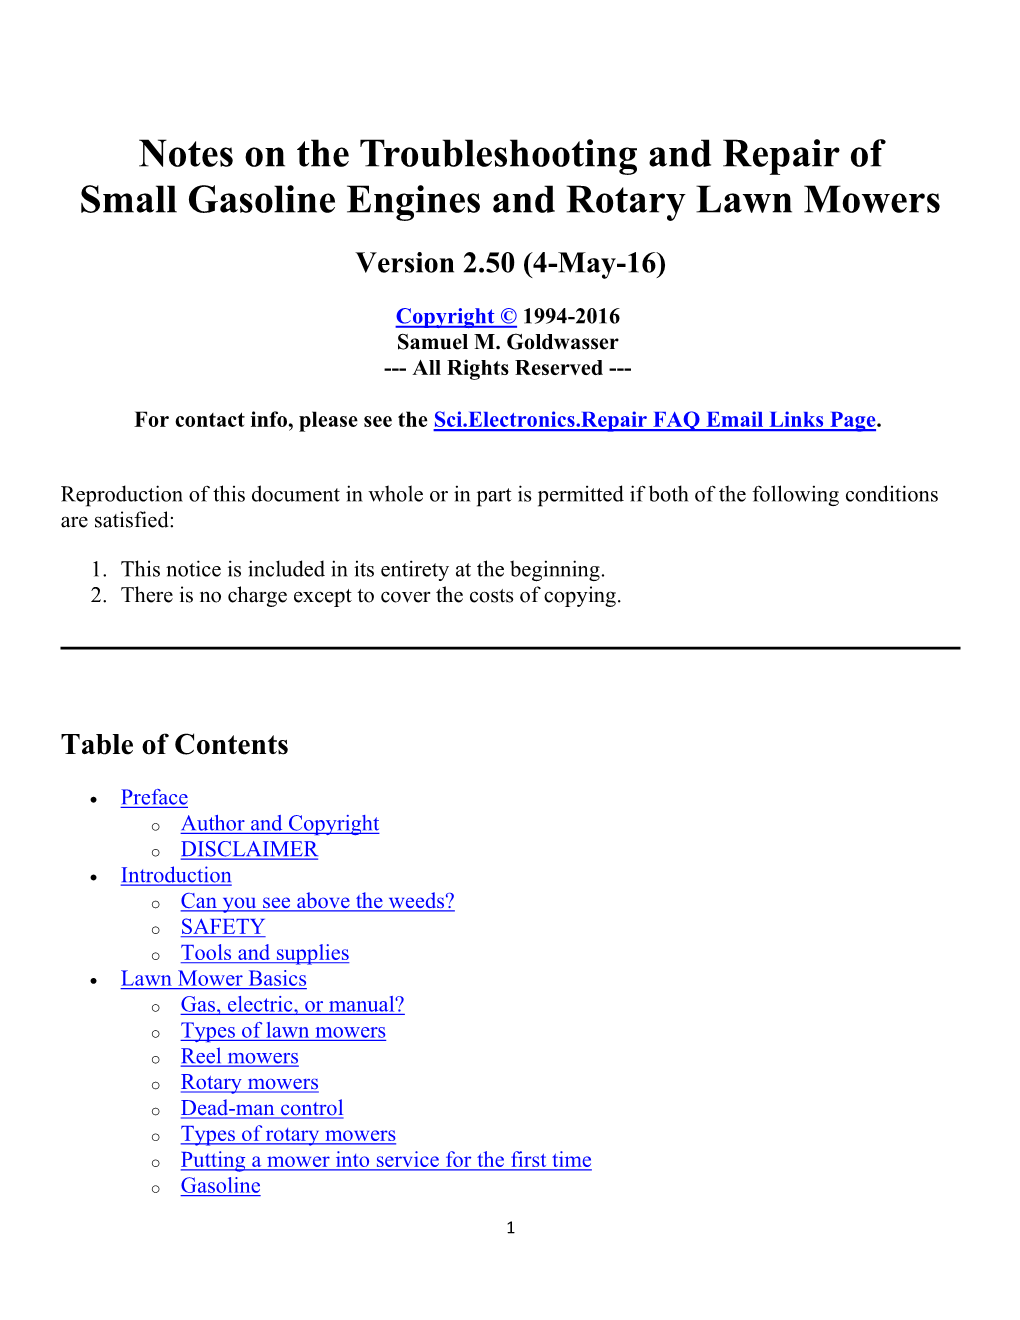 Notes on the Troubleshooting and Repair of Small Gasoline Engines and Rotary Lawn Mowers Version 2.50 (4-May-16)